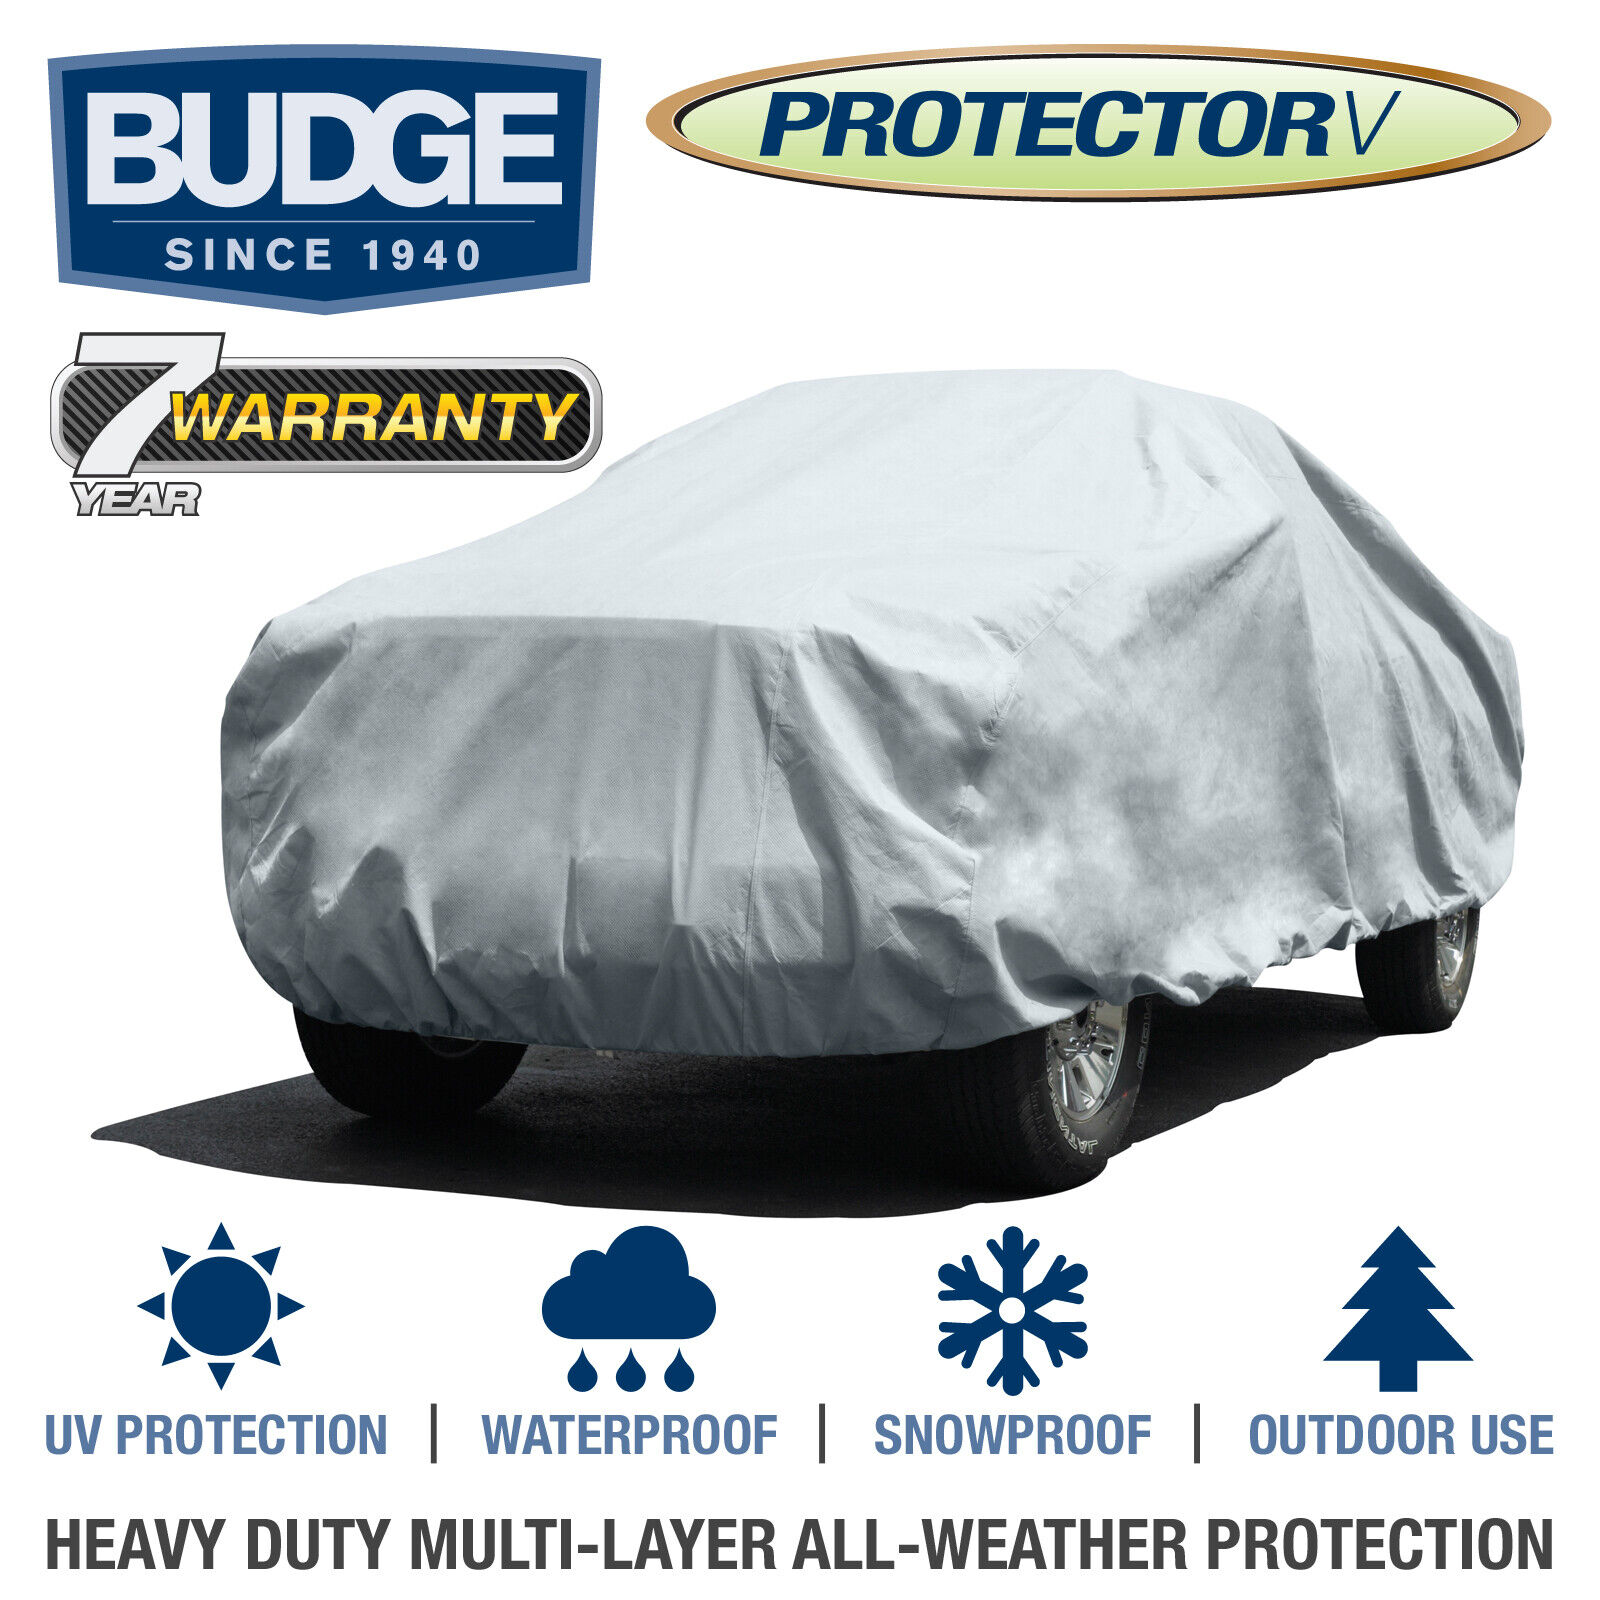 Budge Protector V Truck Cover Fits Extended Cab Compact up to 18\'6\